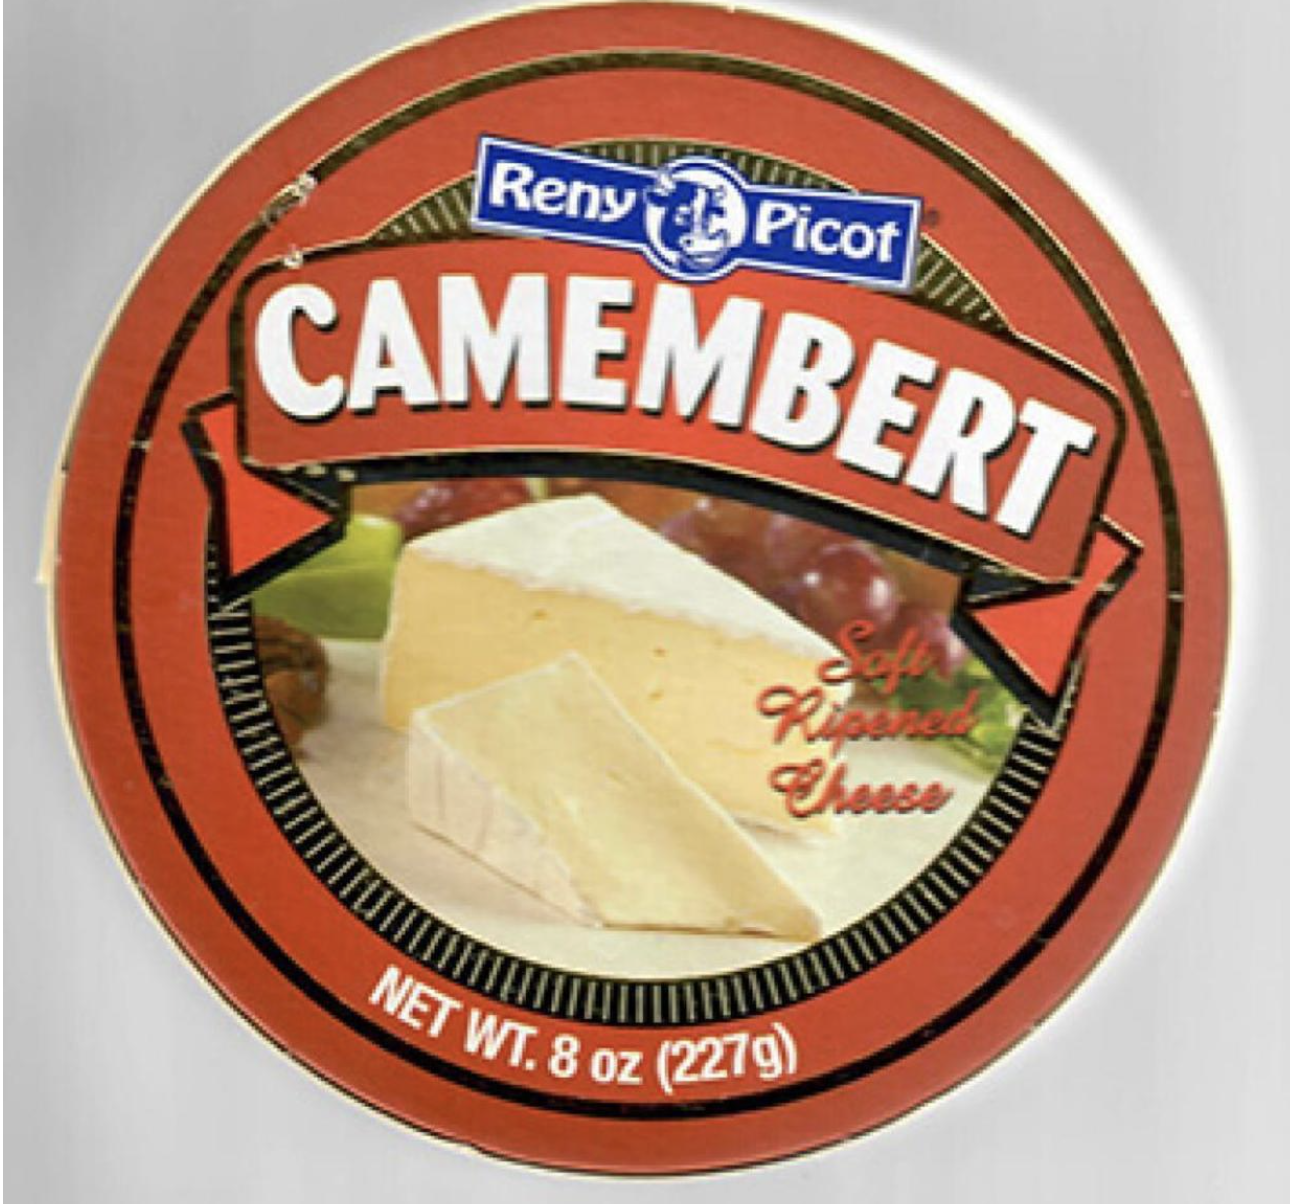 One cheese products recalled by Old Europe Cheese